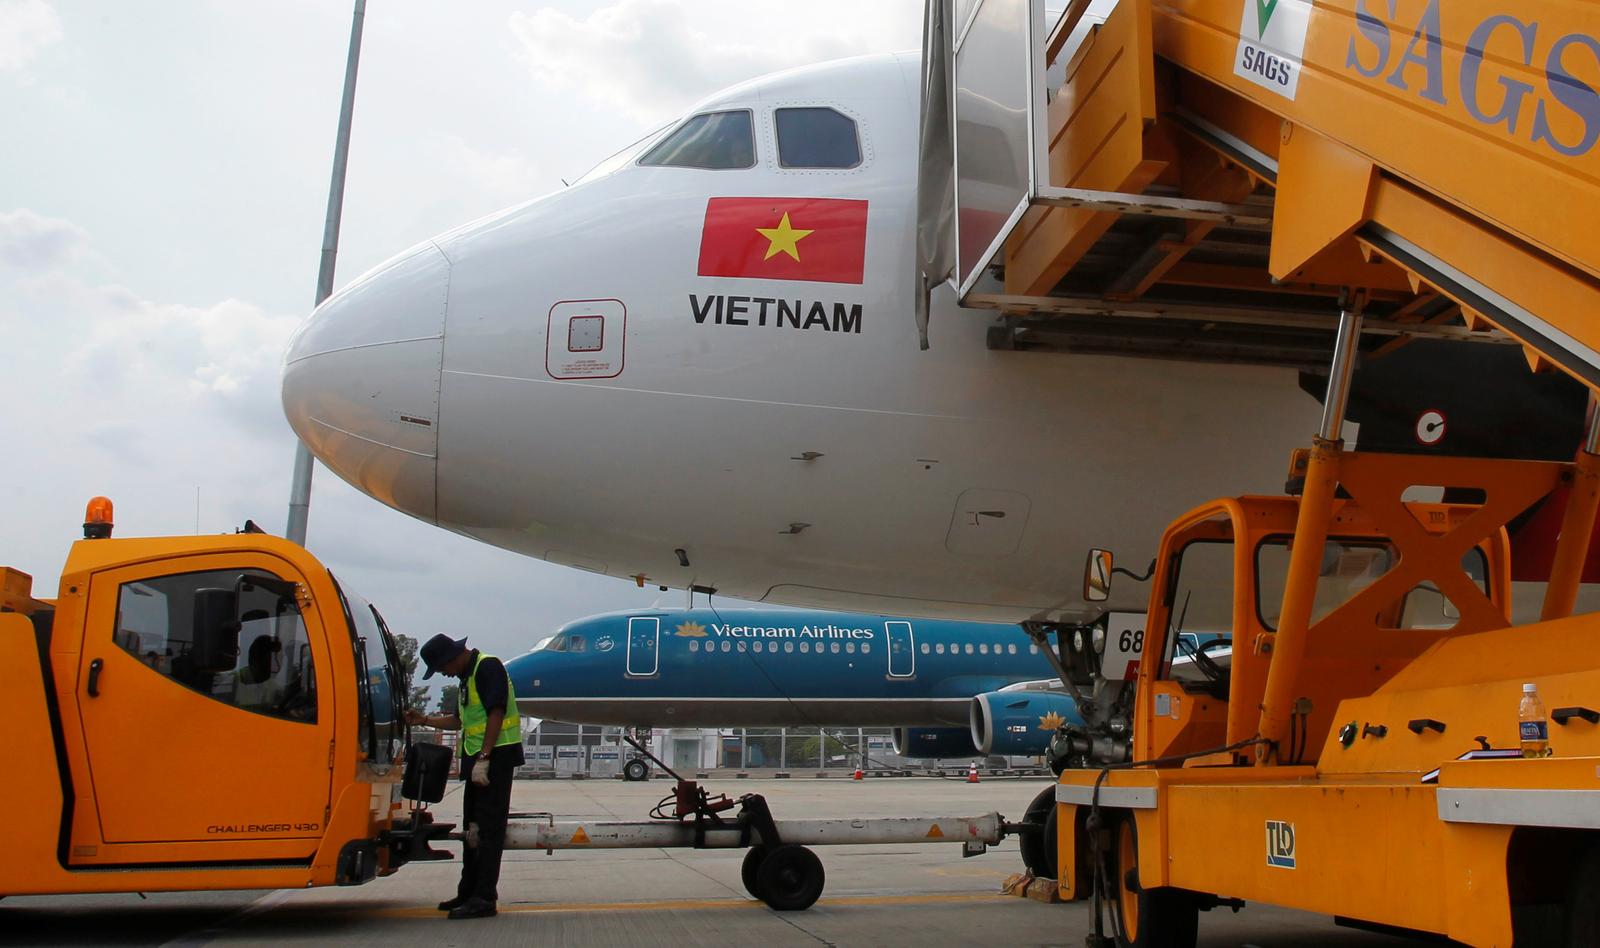 Vietnam to extend jet fuel tax cut to help its airlines